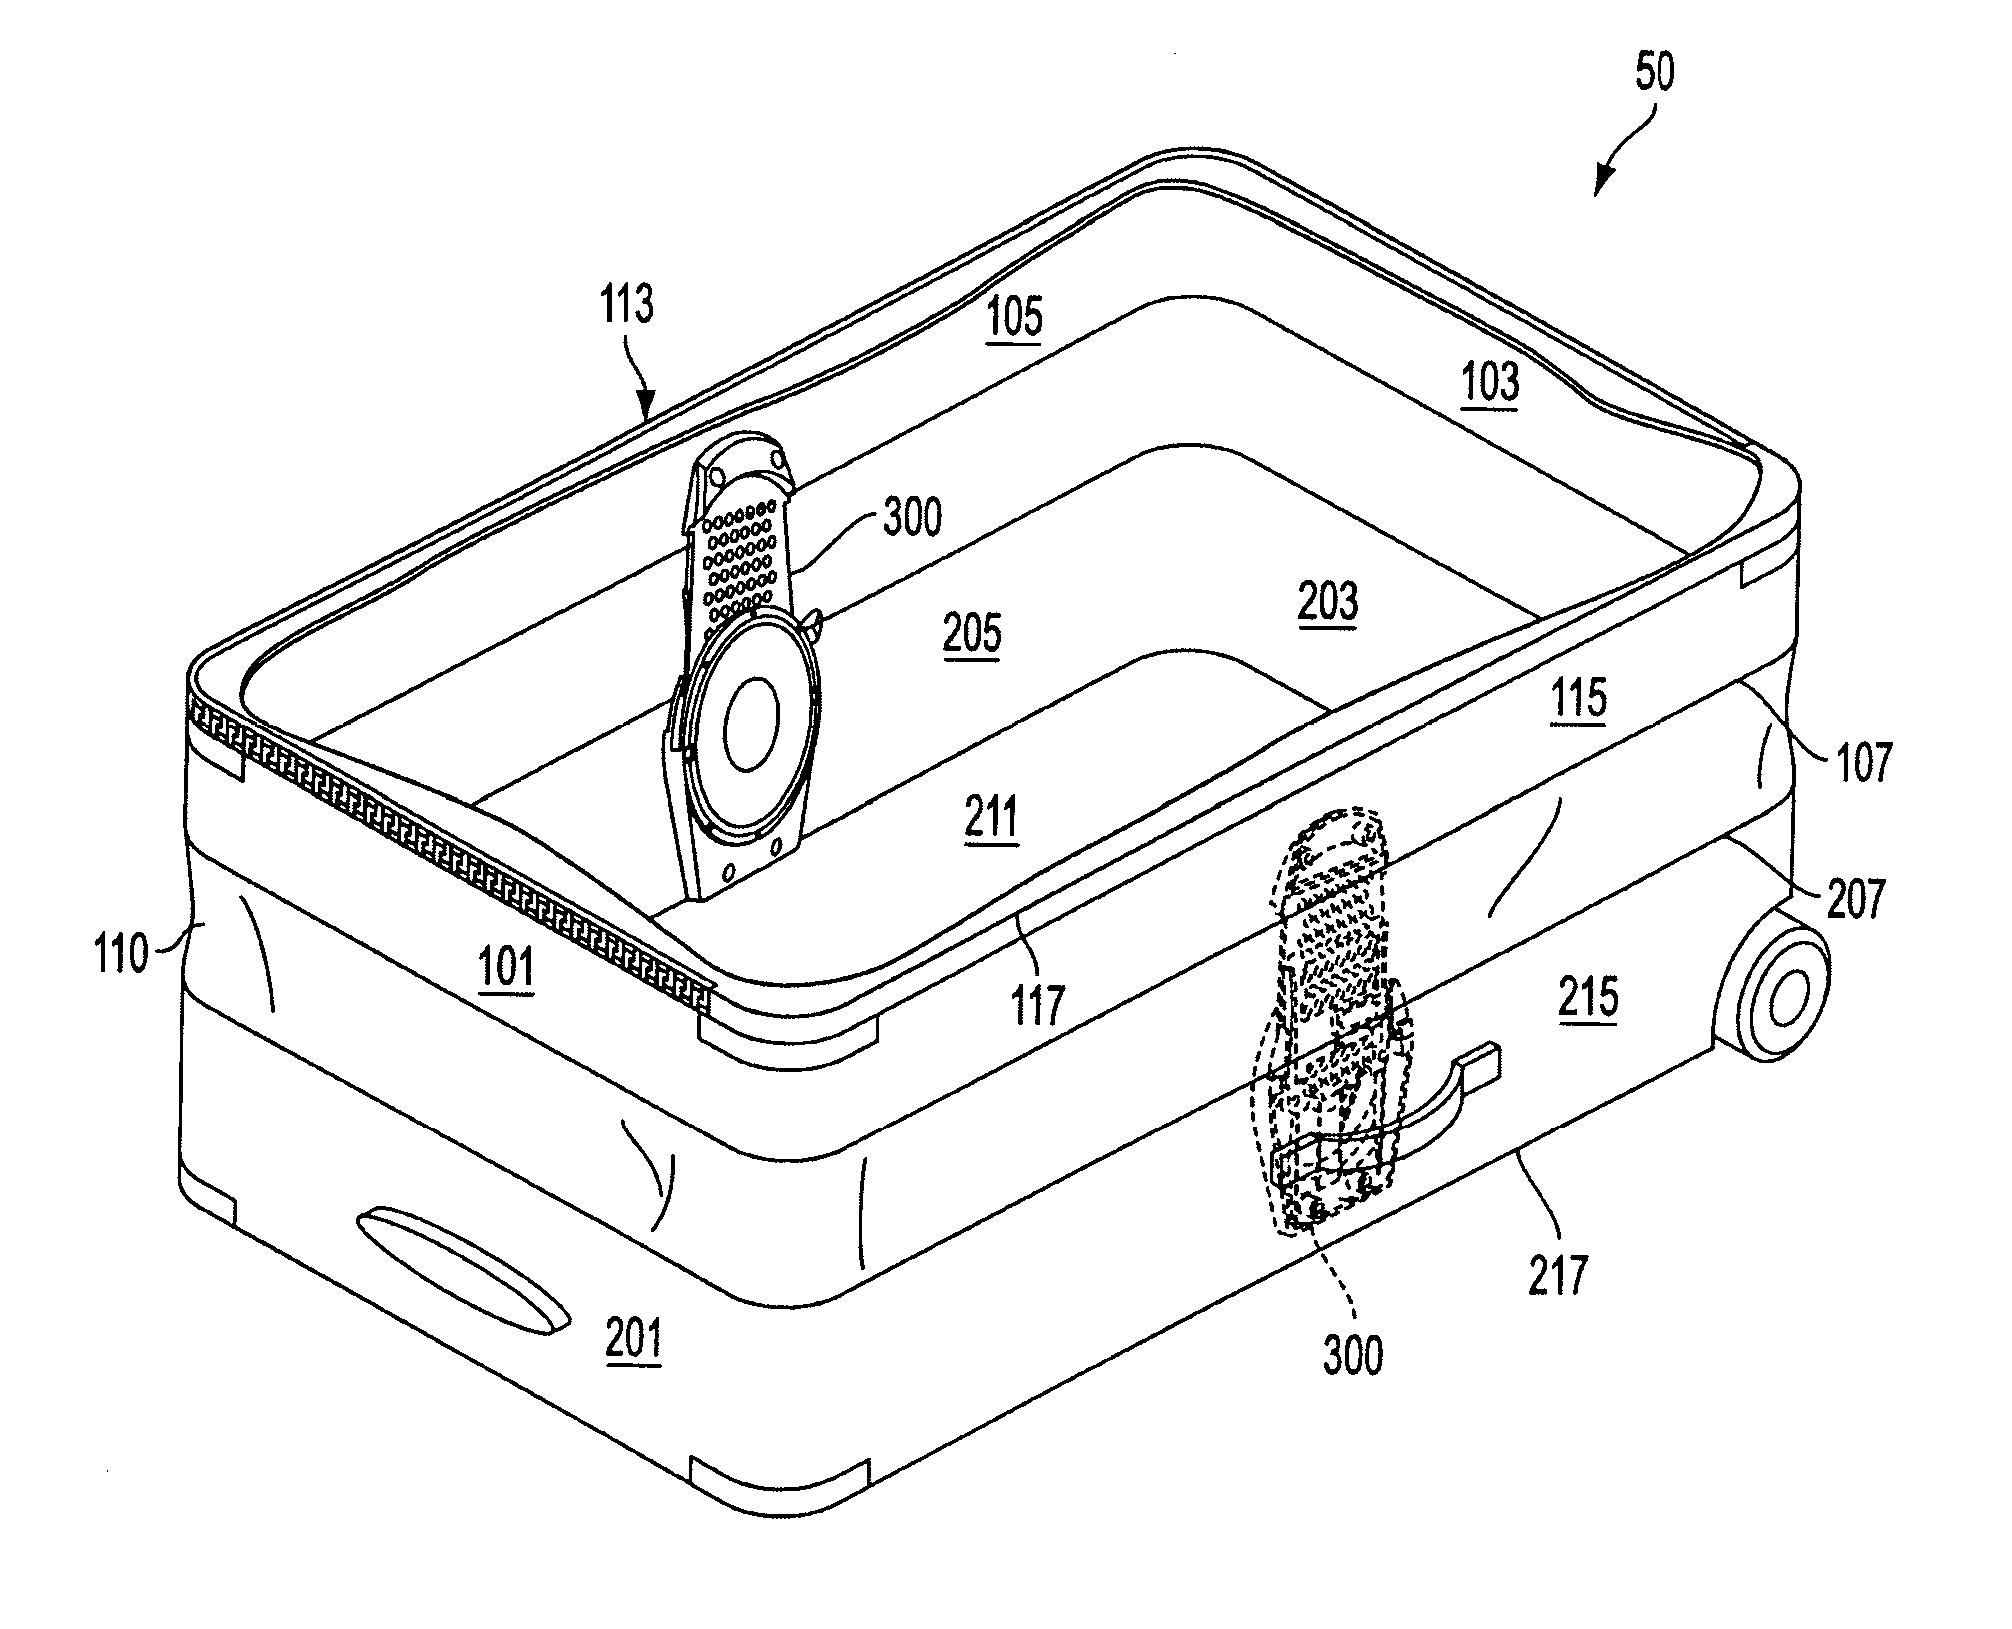 Expandable luggage and expansion mechanism